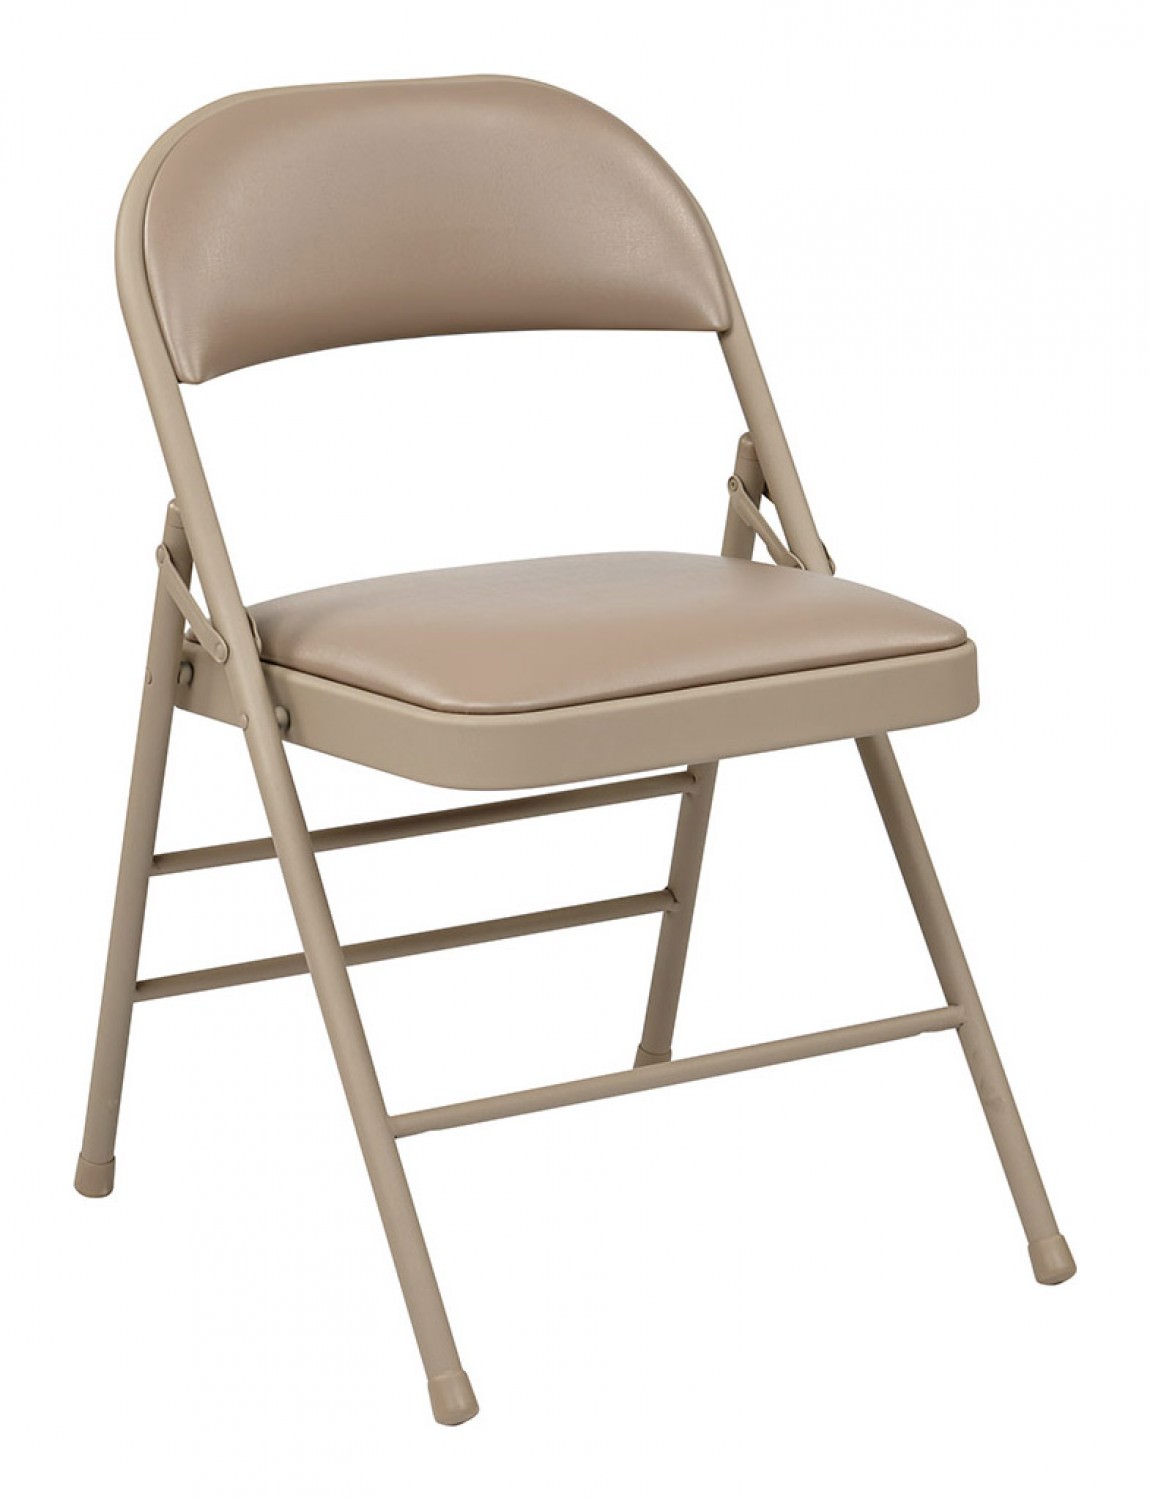 Padded Folding Chair 4 Pack